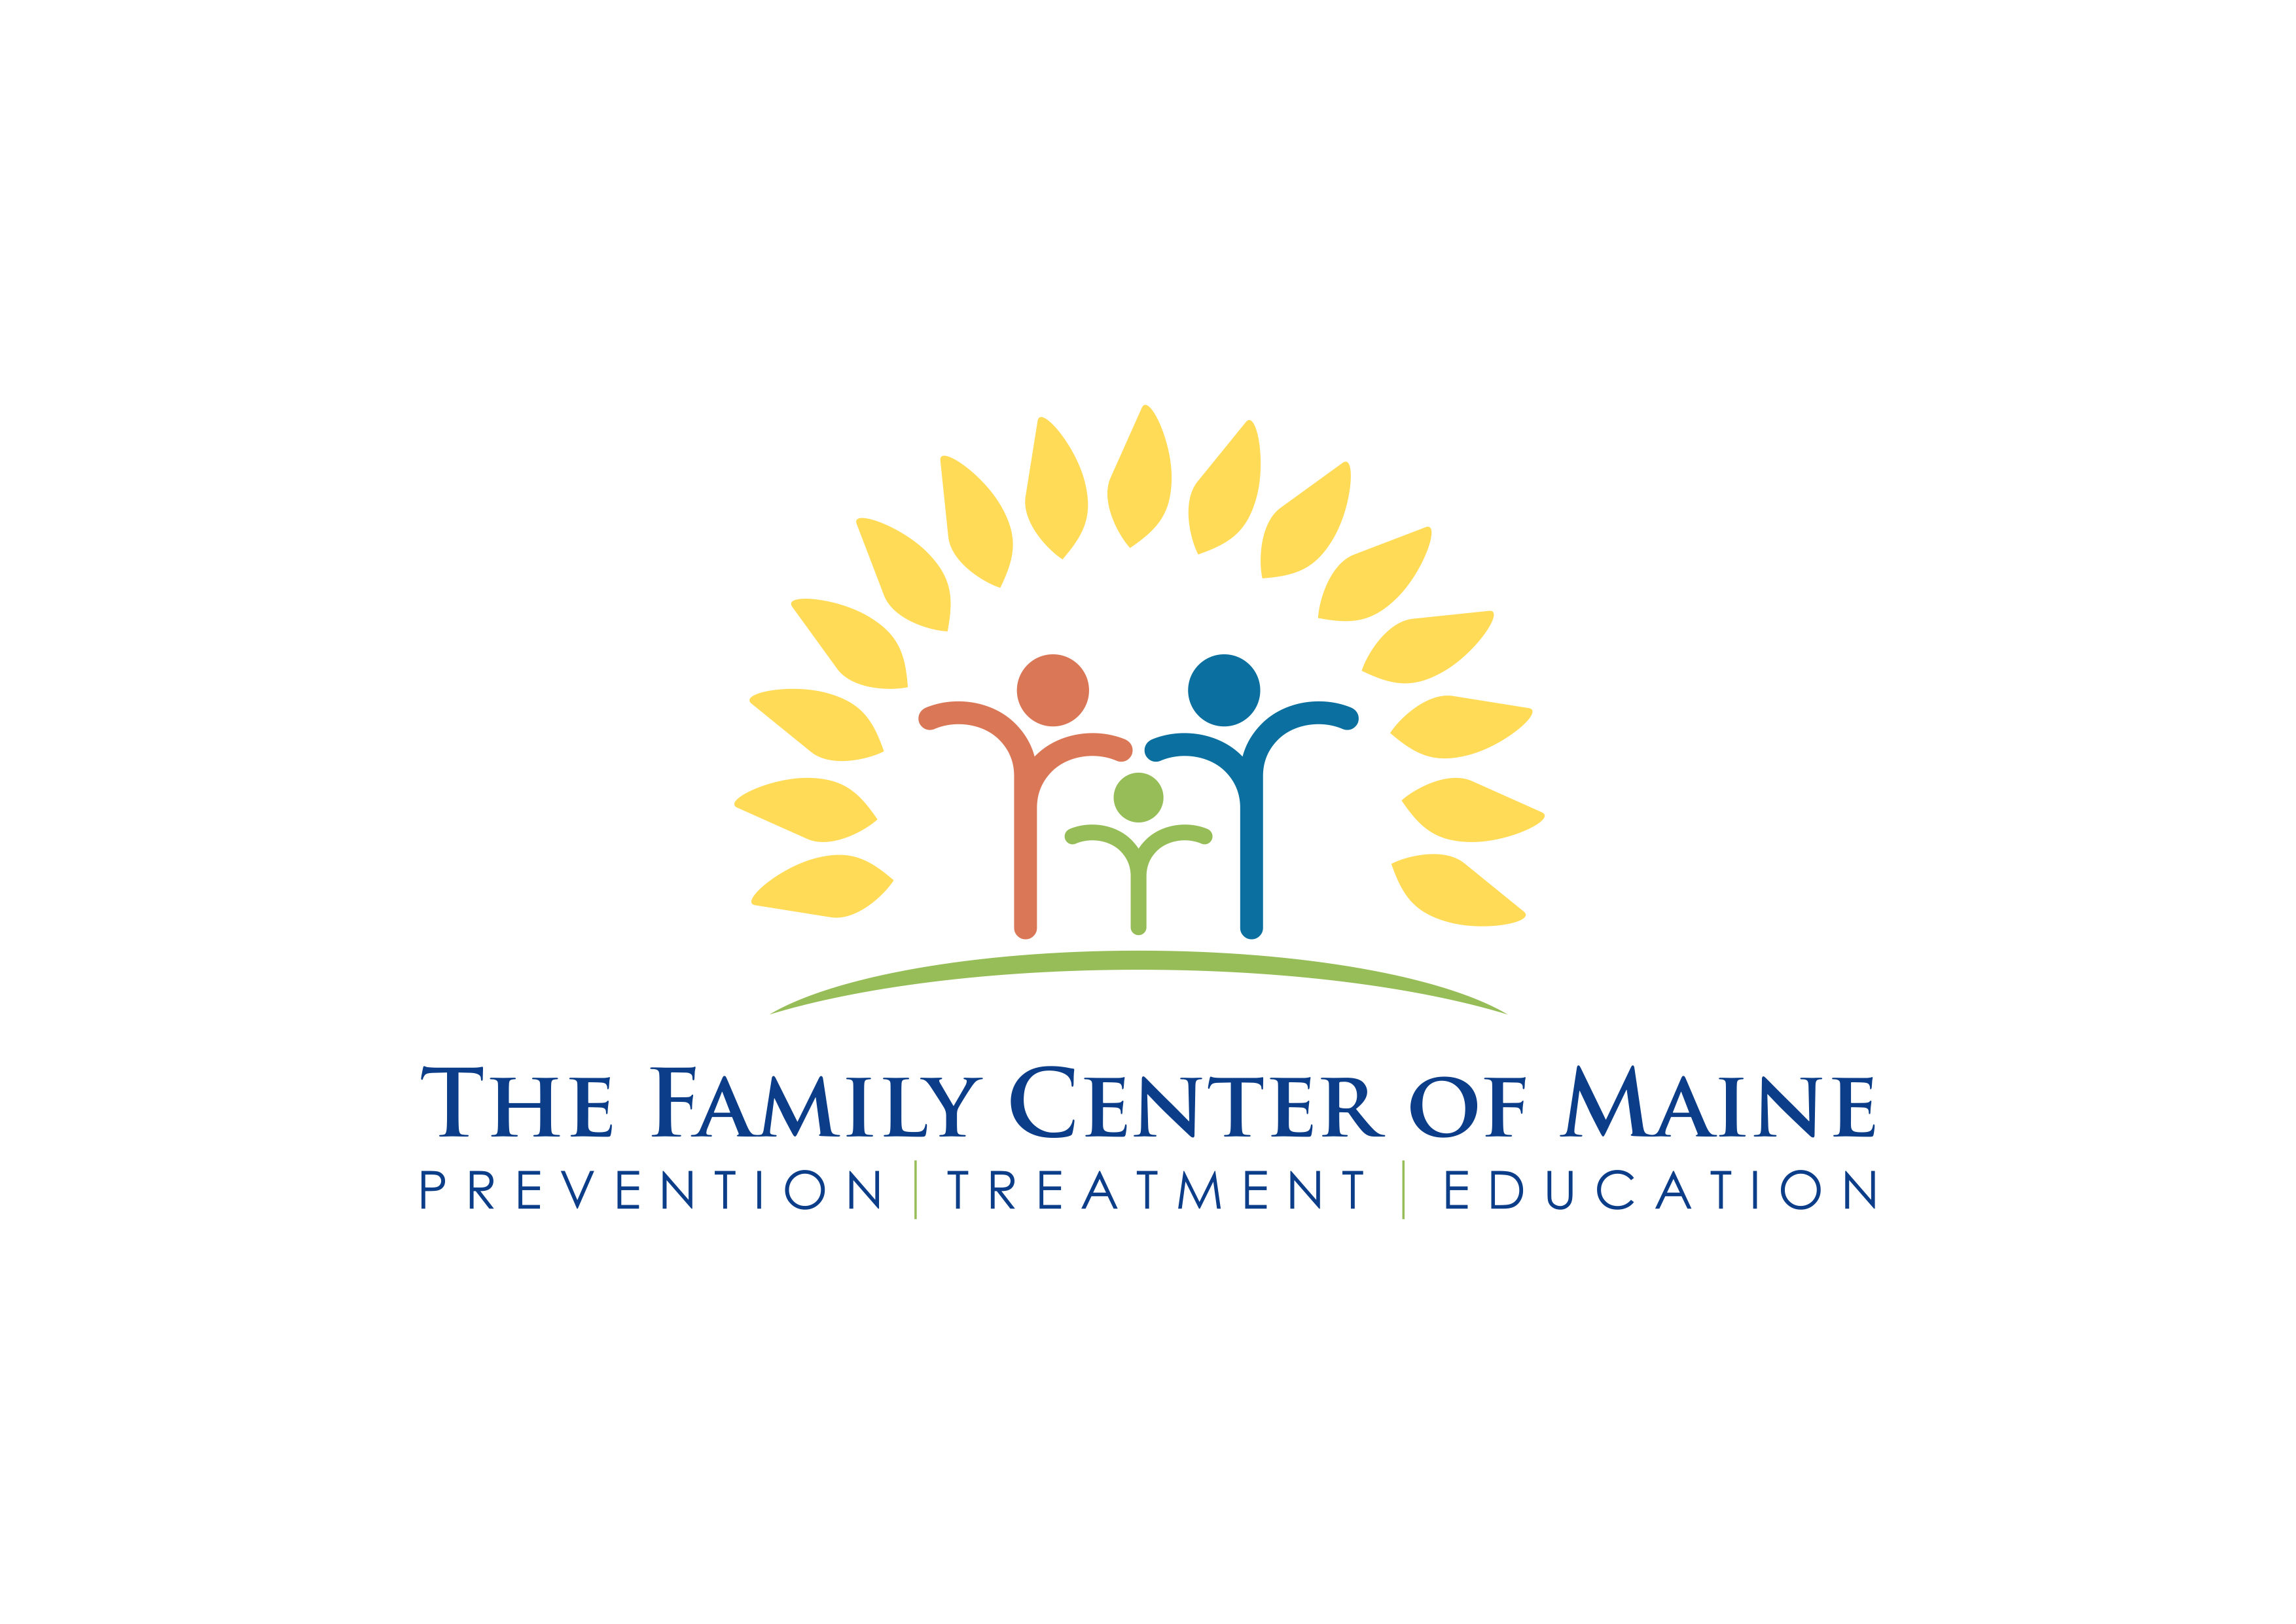 The Family Center of Maine